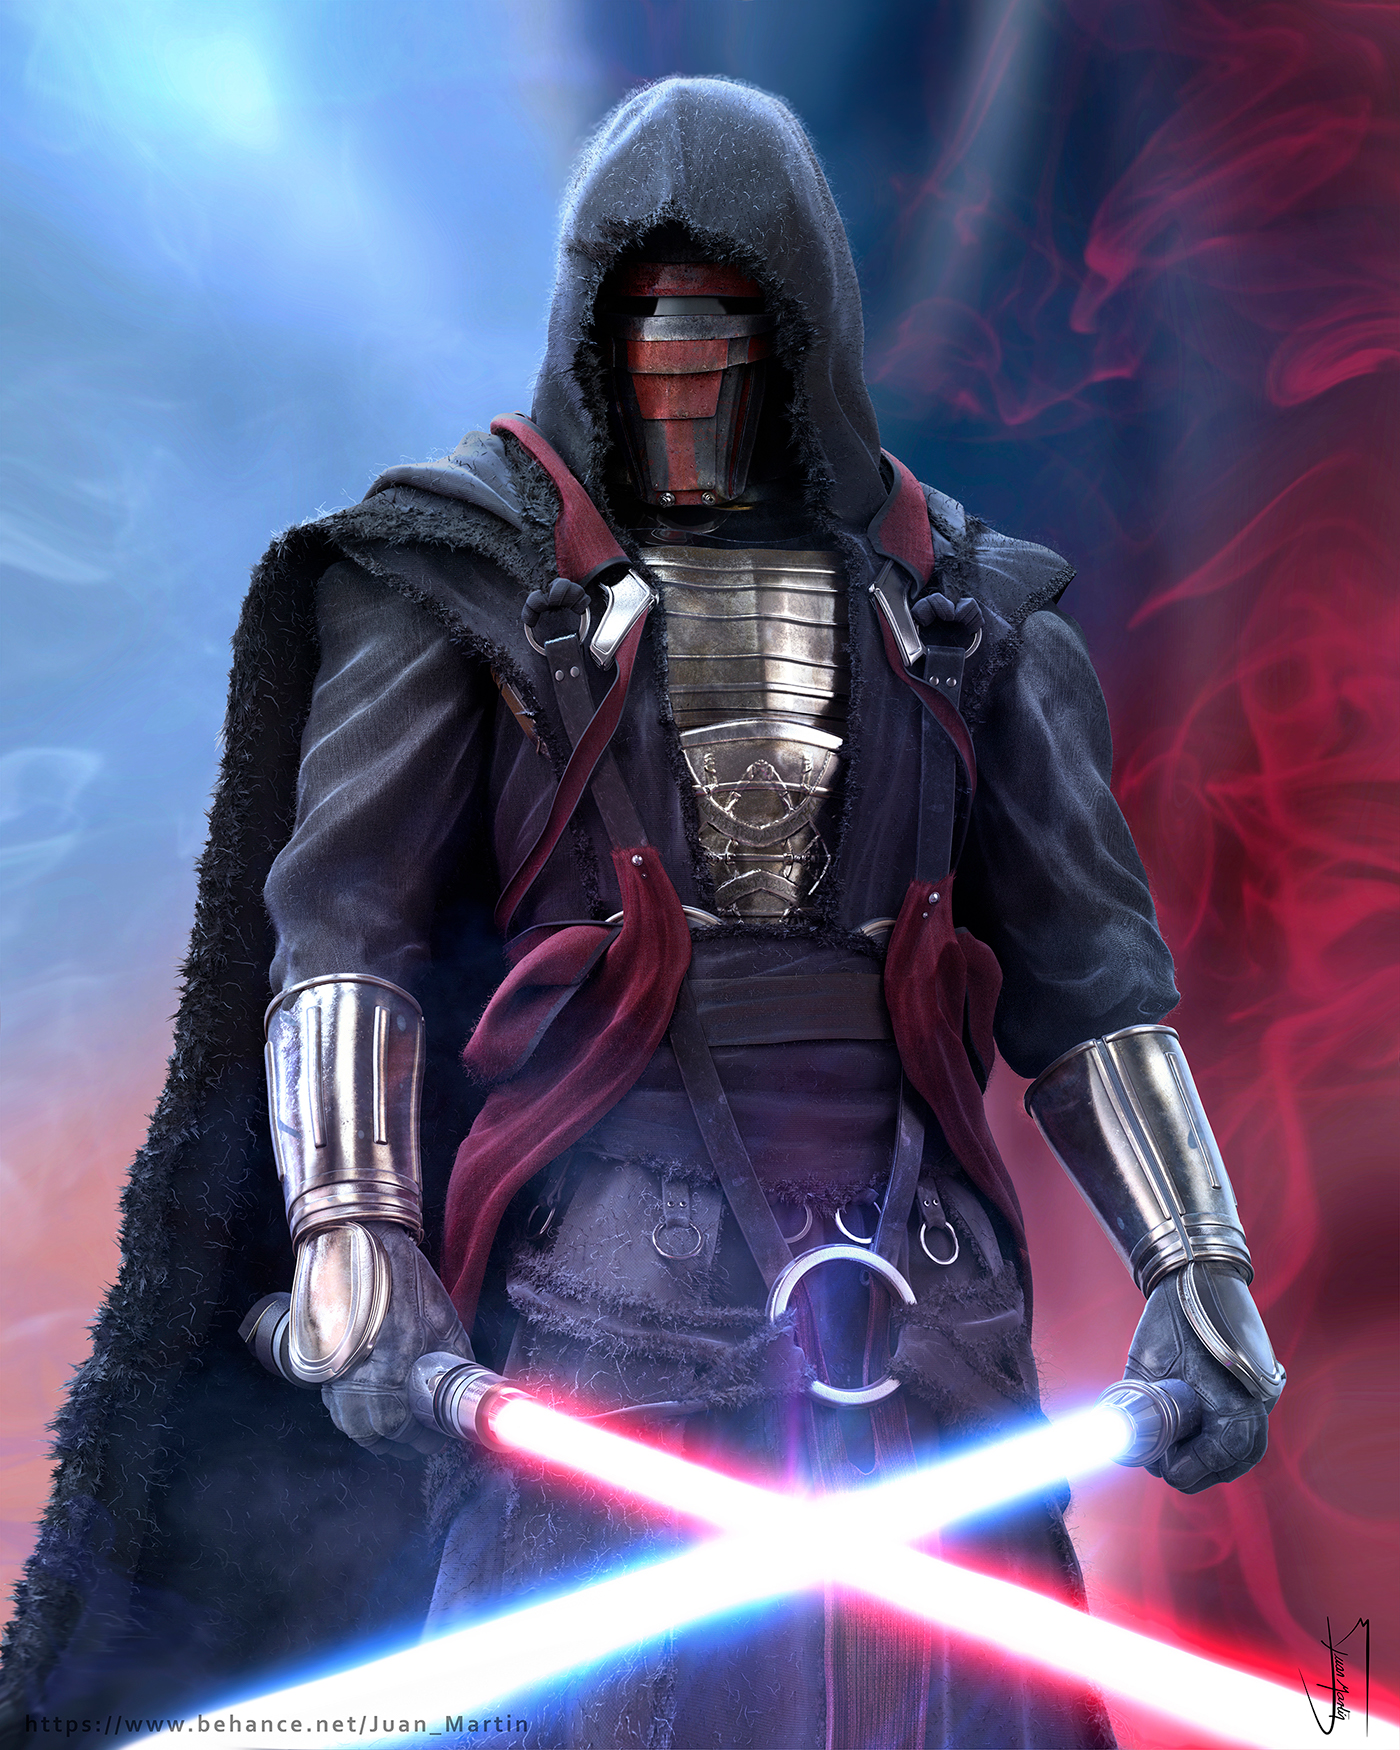 A Fan art interpretation of one of my favorite Sith Lords, Revan, from Knig...